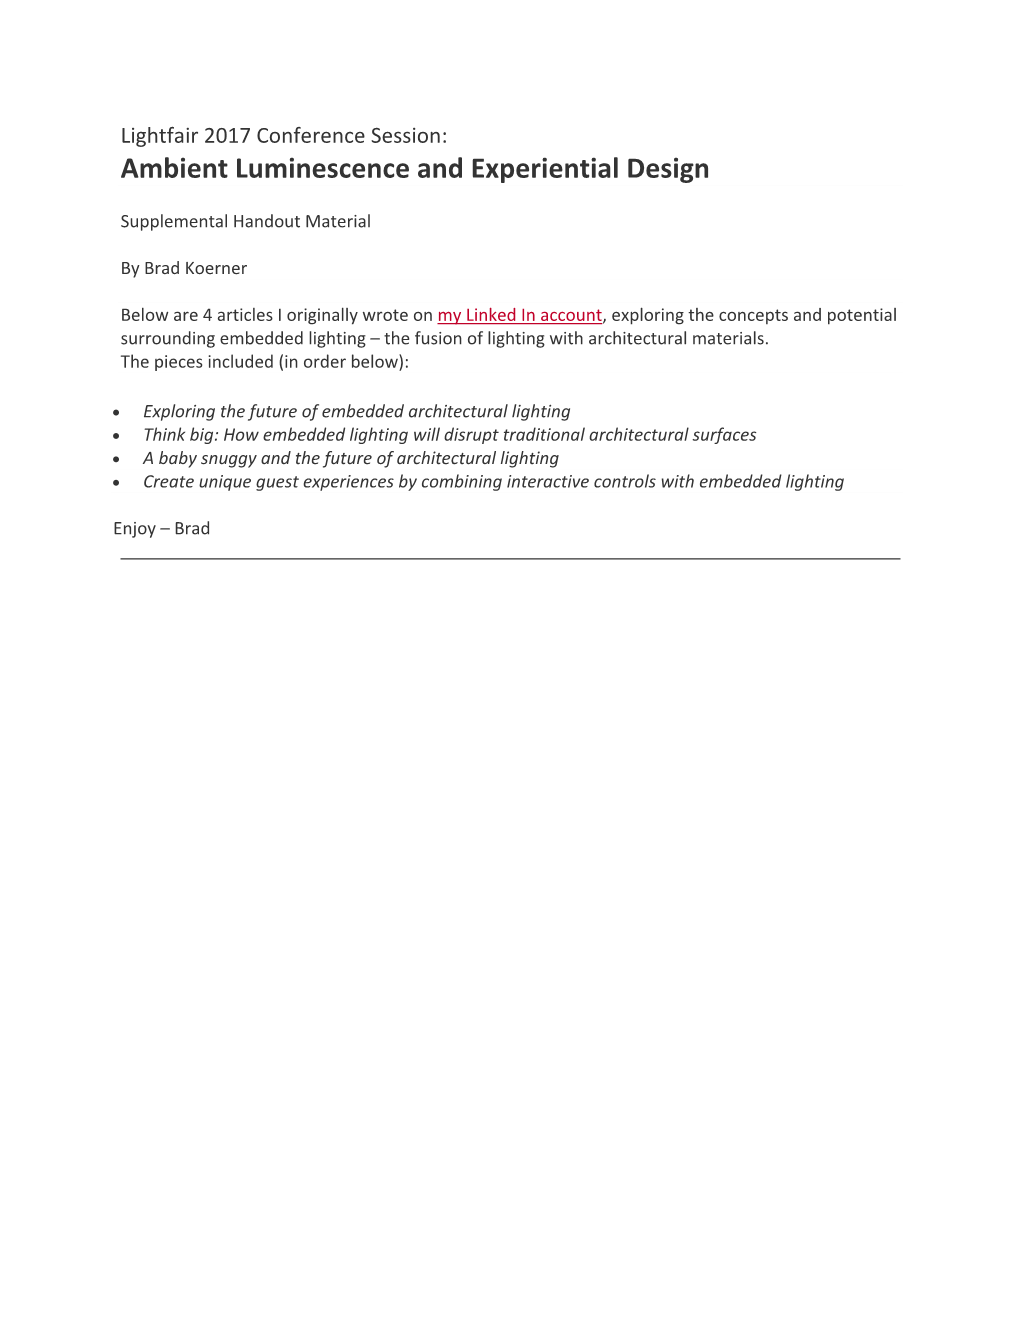 Ambient Luminescence and Experiential Design